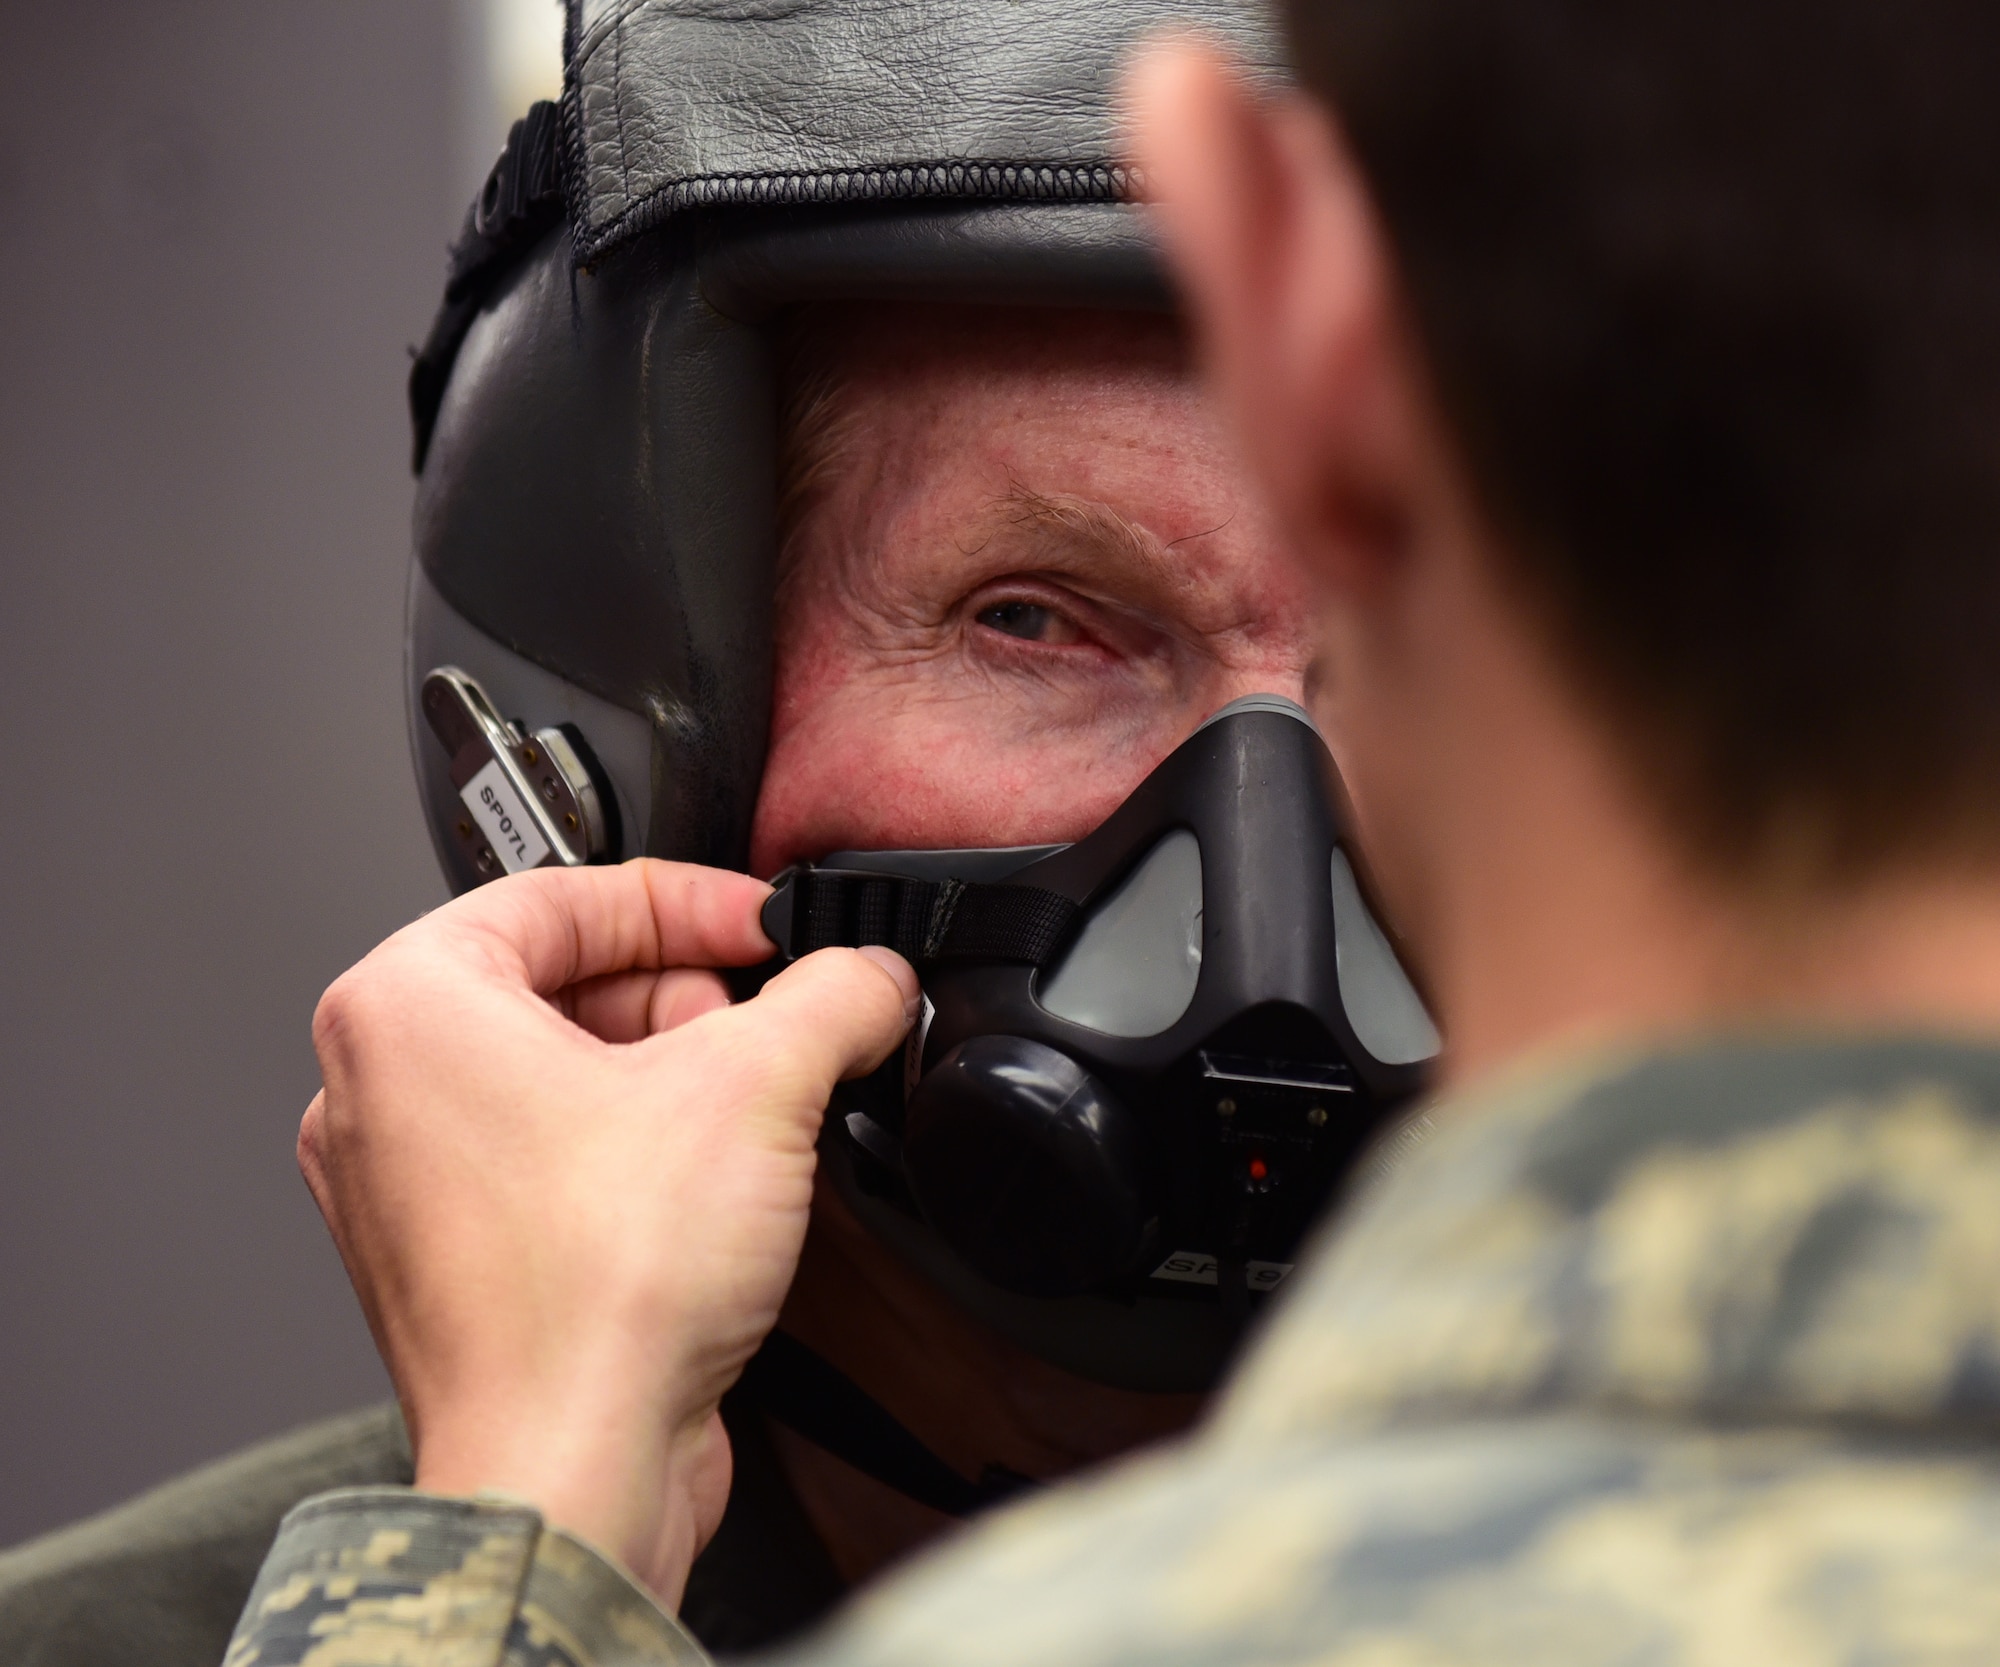 U.S. Senator Bill Nelson, of Florida, is fitted for flight gear by Airman 1st Class Aaron Cusick, 325th Operations Support Squadron aircrew flight equipment technician, prior to a familiarization flight at Tyndall Air Force Base, Fla., April 3, 2018. The senator was flown in a T-38 Talon after undergoing several safety briefings, medical screenings and a mission brief given by Col. Michael Hernandez, 325th Fighter Wing commander. (U.S. Air Force photo by Airman 1st Class Isaiah J. Soliz/Released)